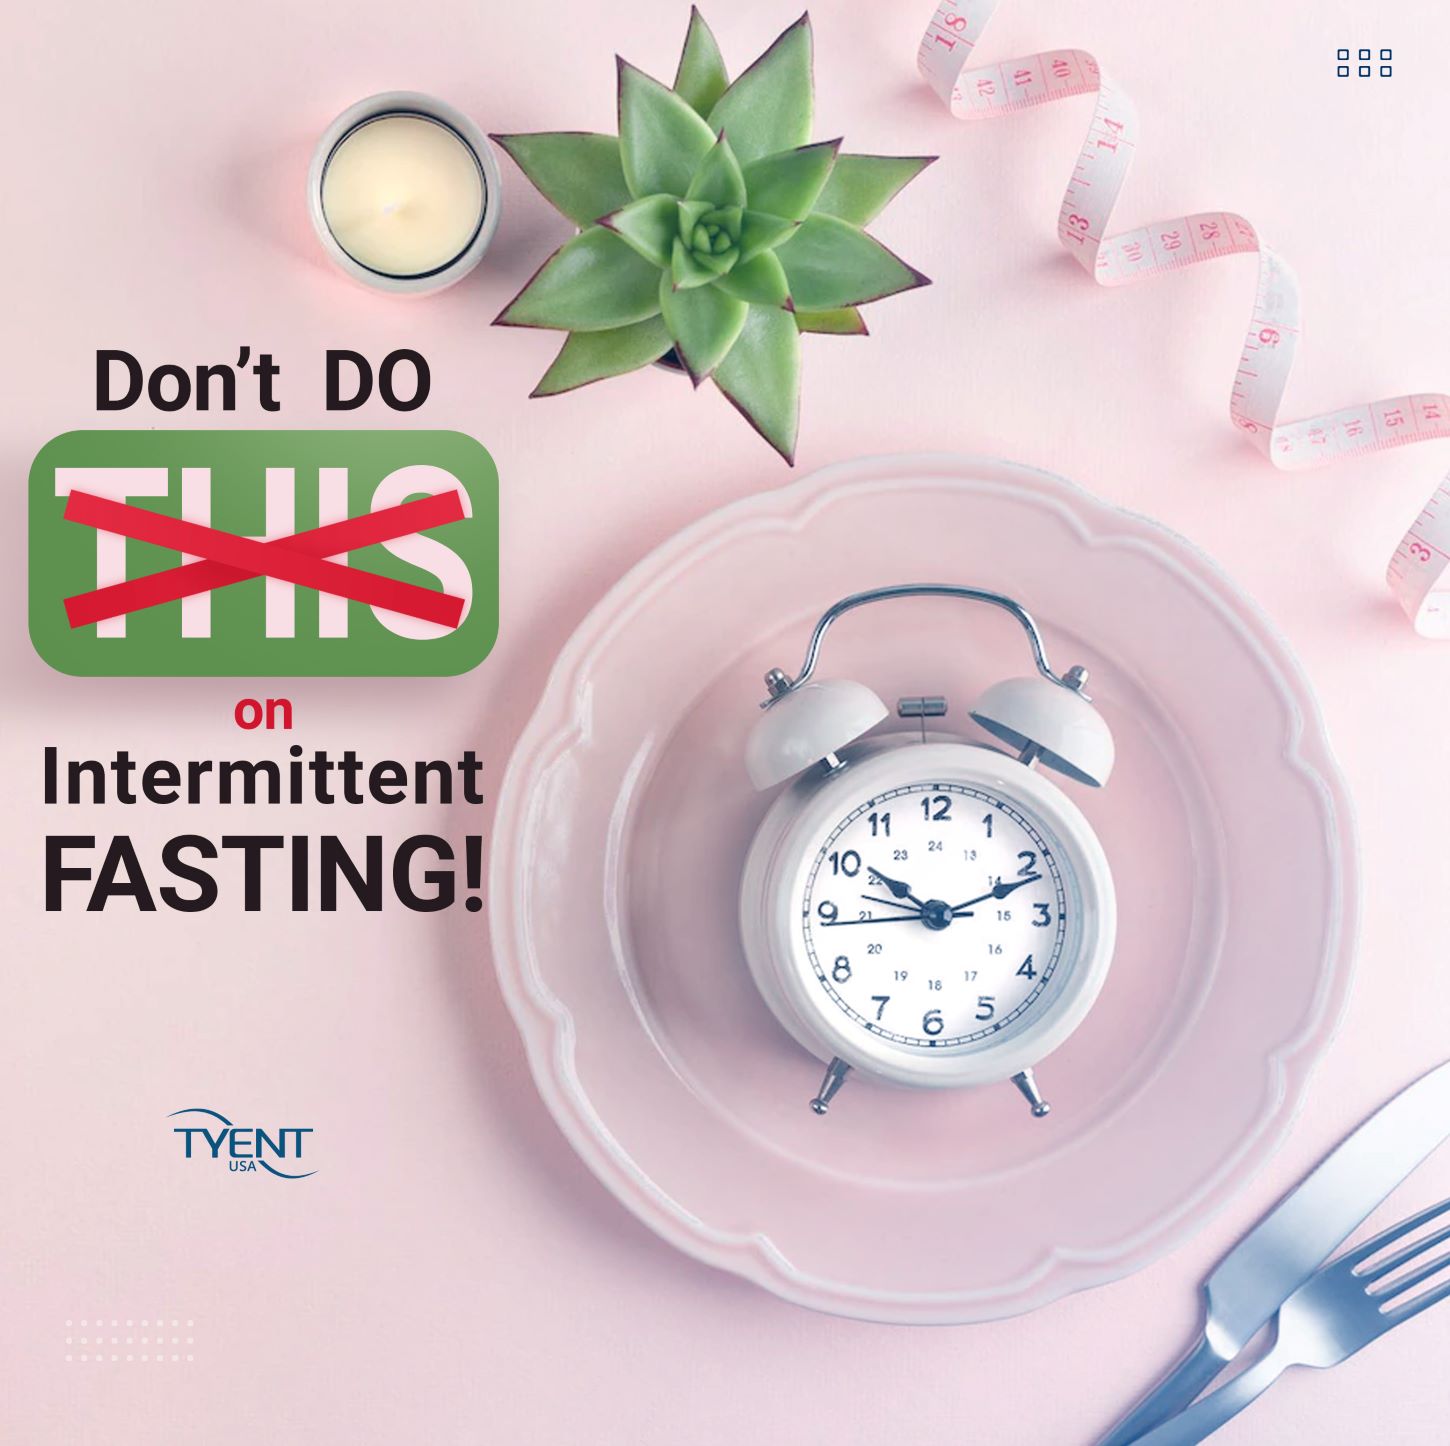 Don't Do THIS on Intermittent Fasting-a1